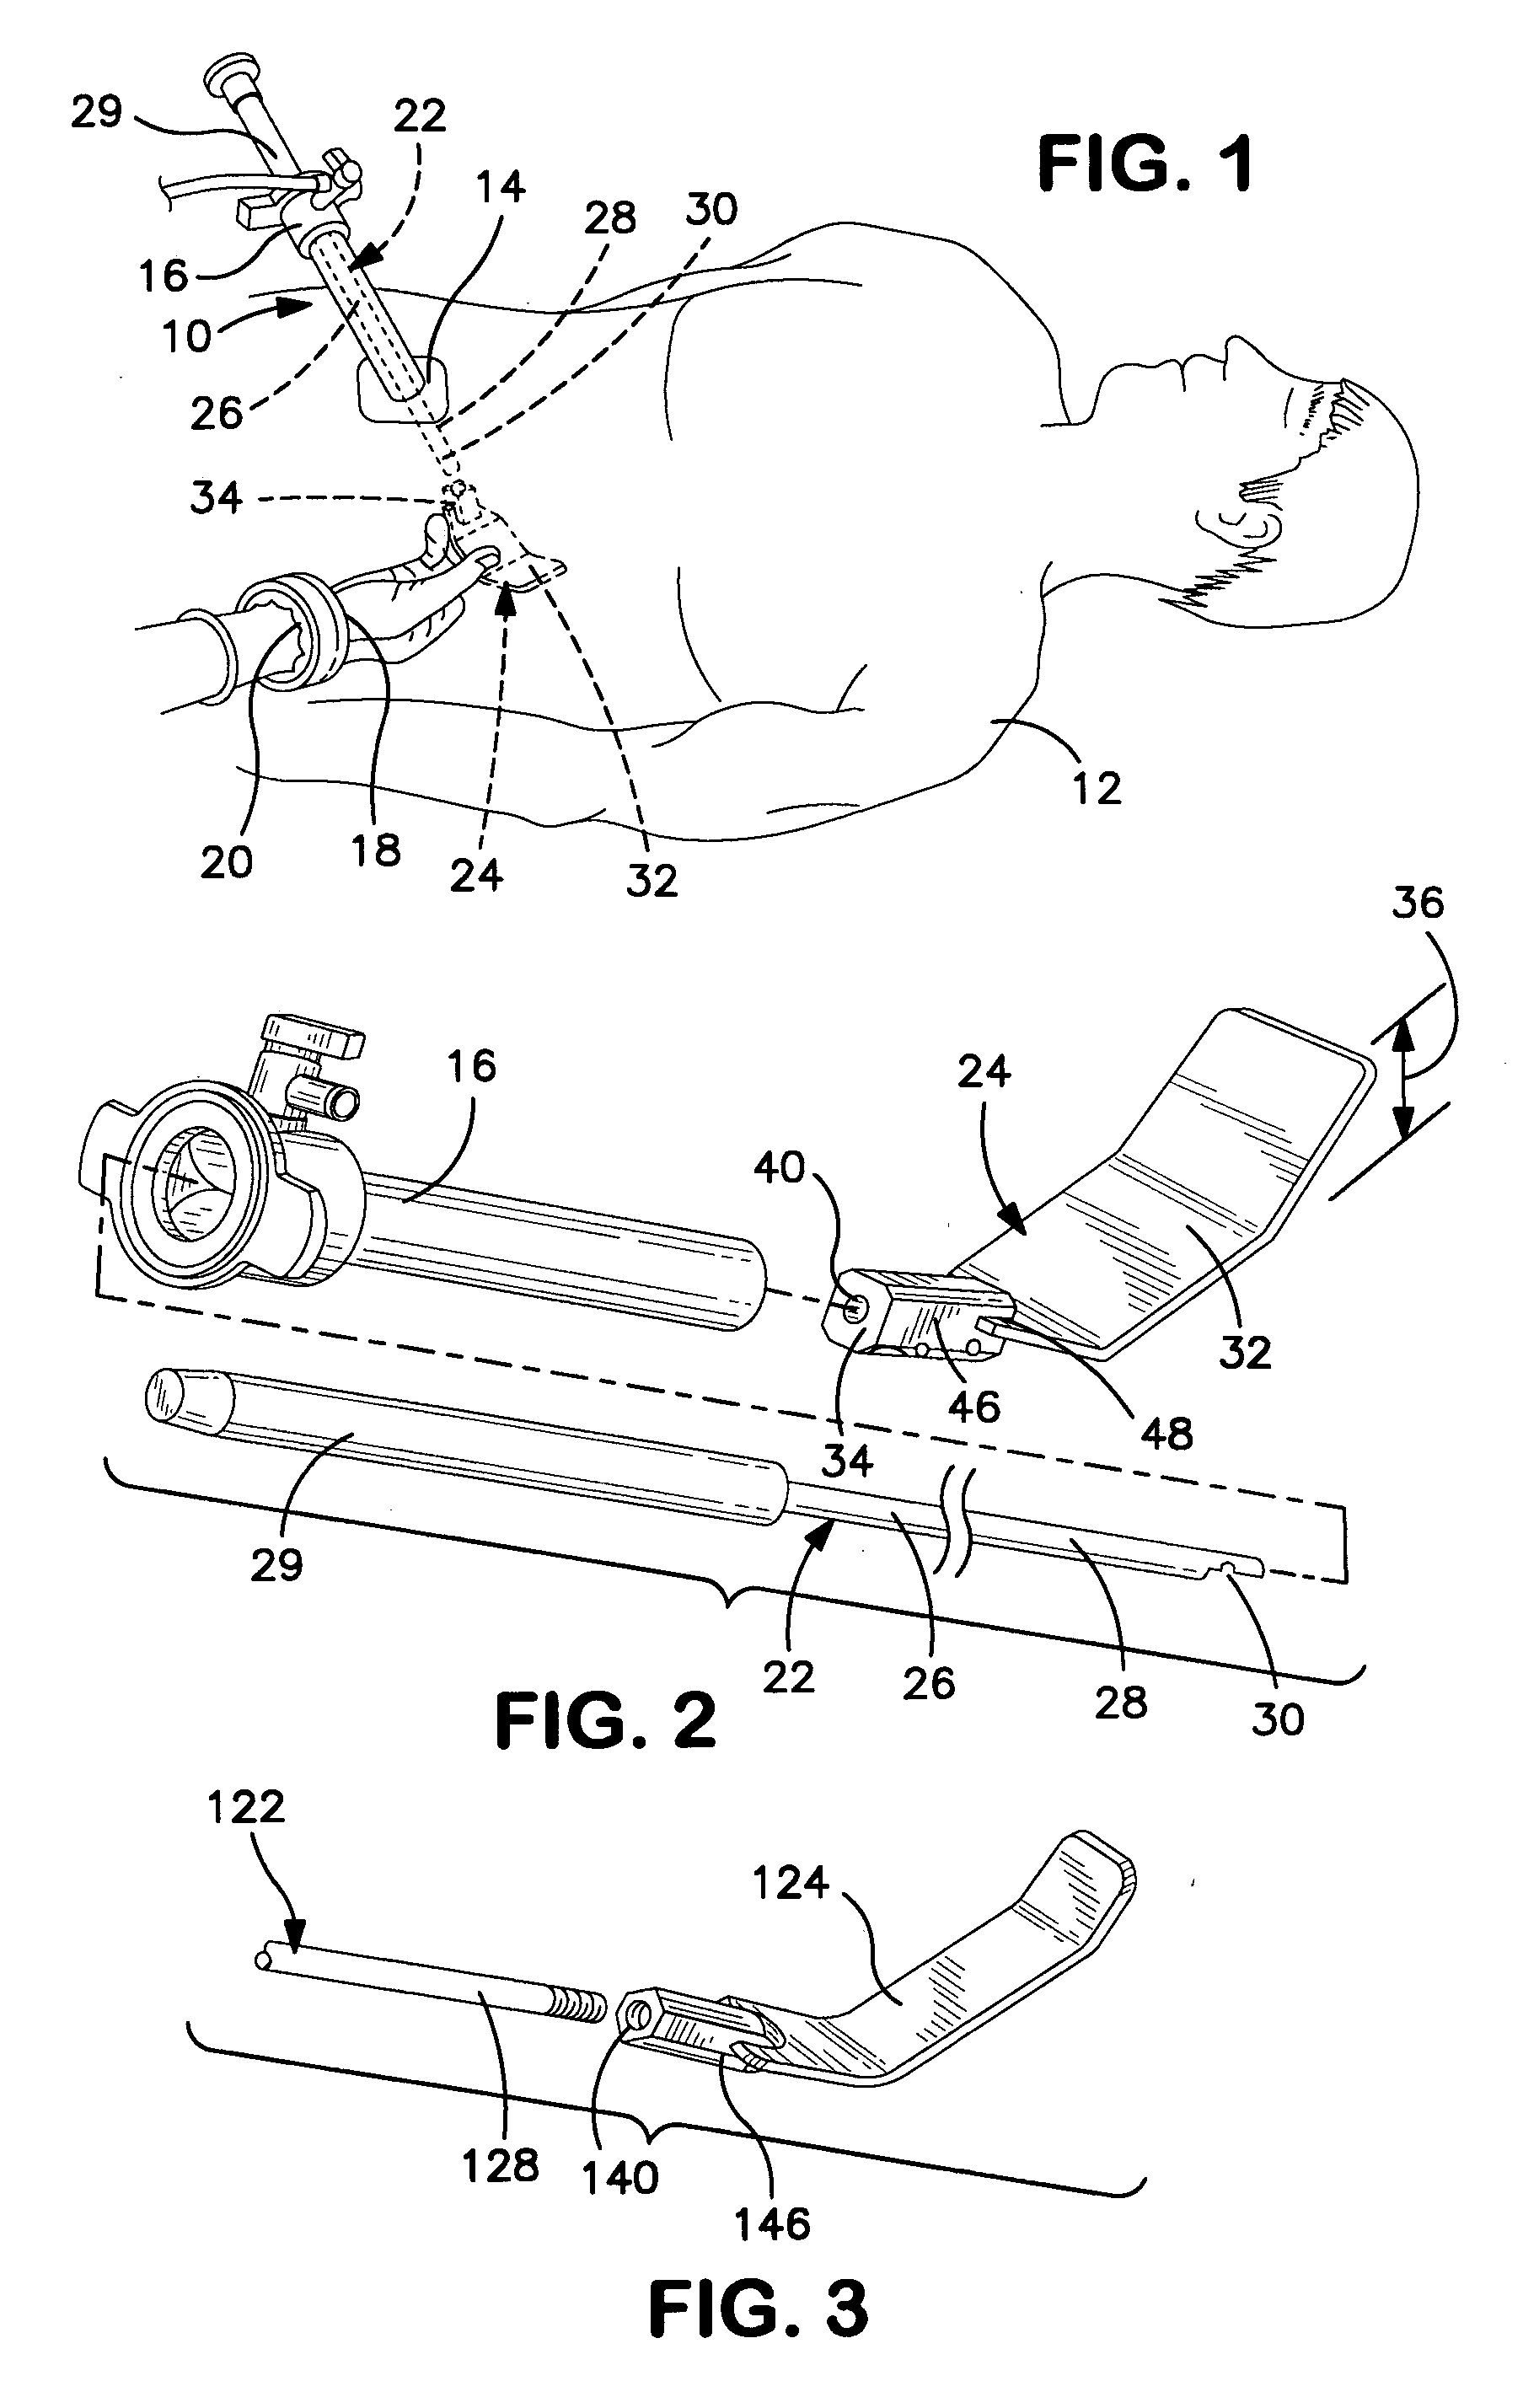 Retractor system for internal in-situ assembly during laparoscopic surgery